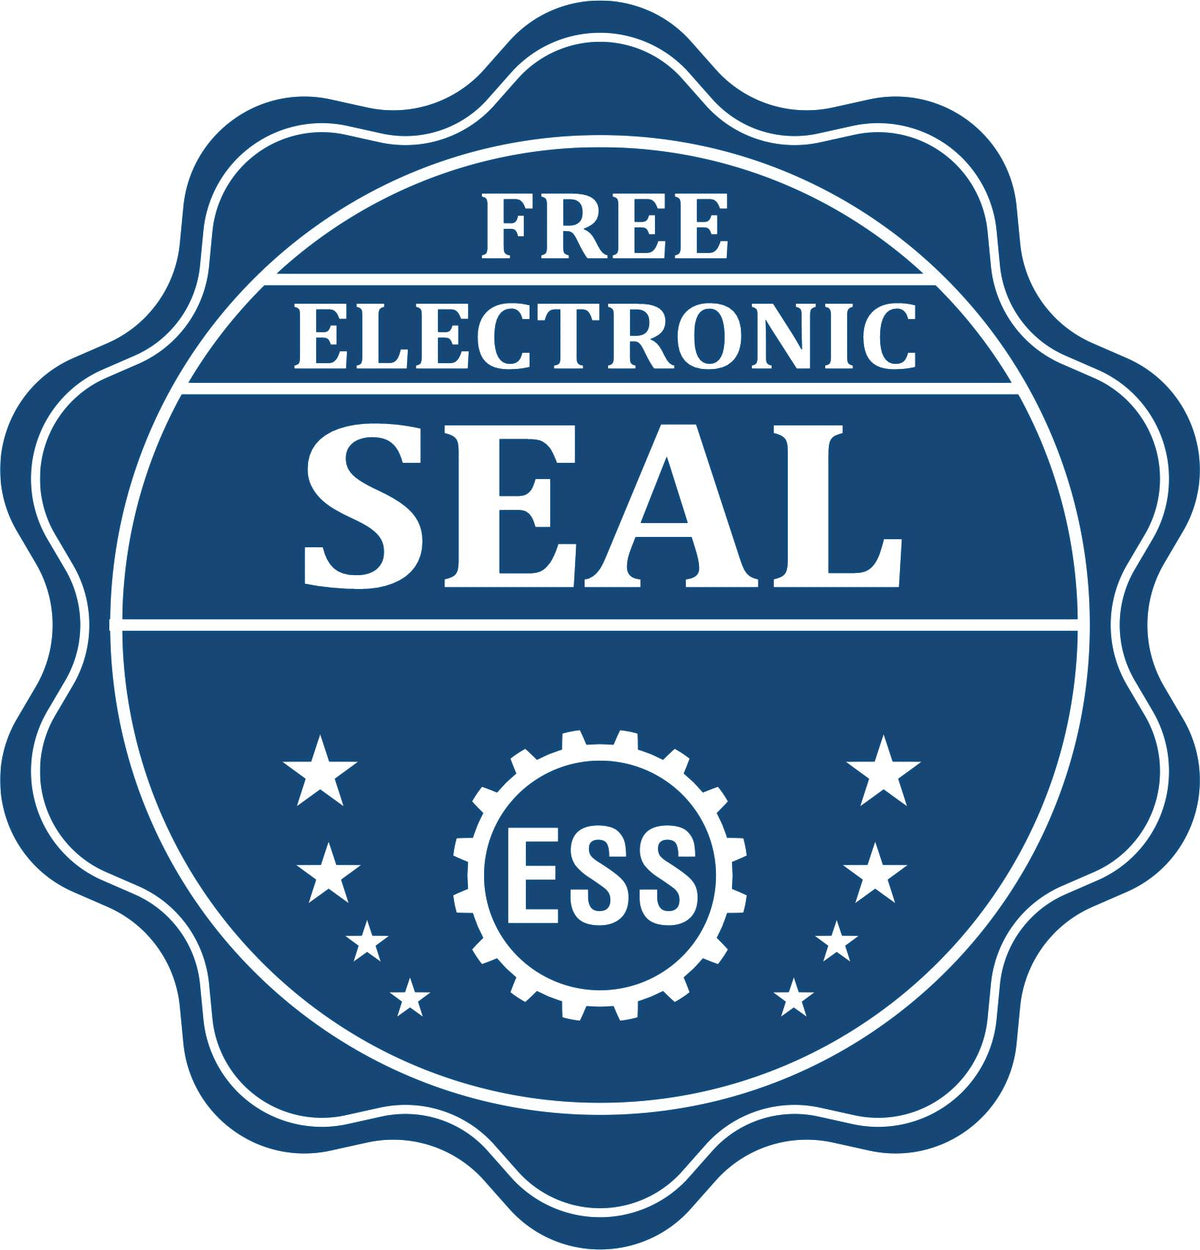 A badge showing a free electronic seal for the Premium MaxLight Pre-Inked Florida Geology Stamp with stars and the ESS gear on the emblem.